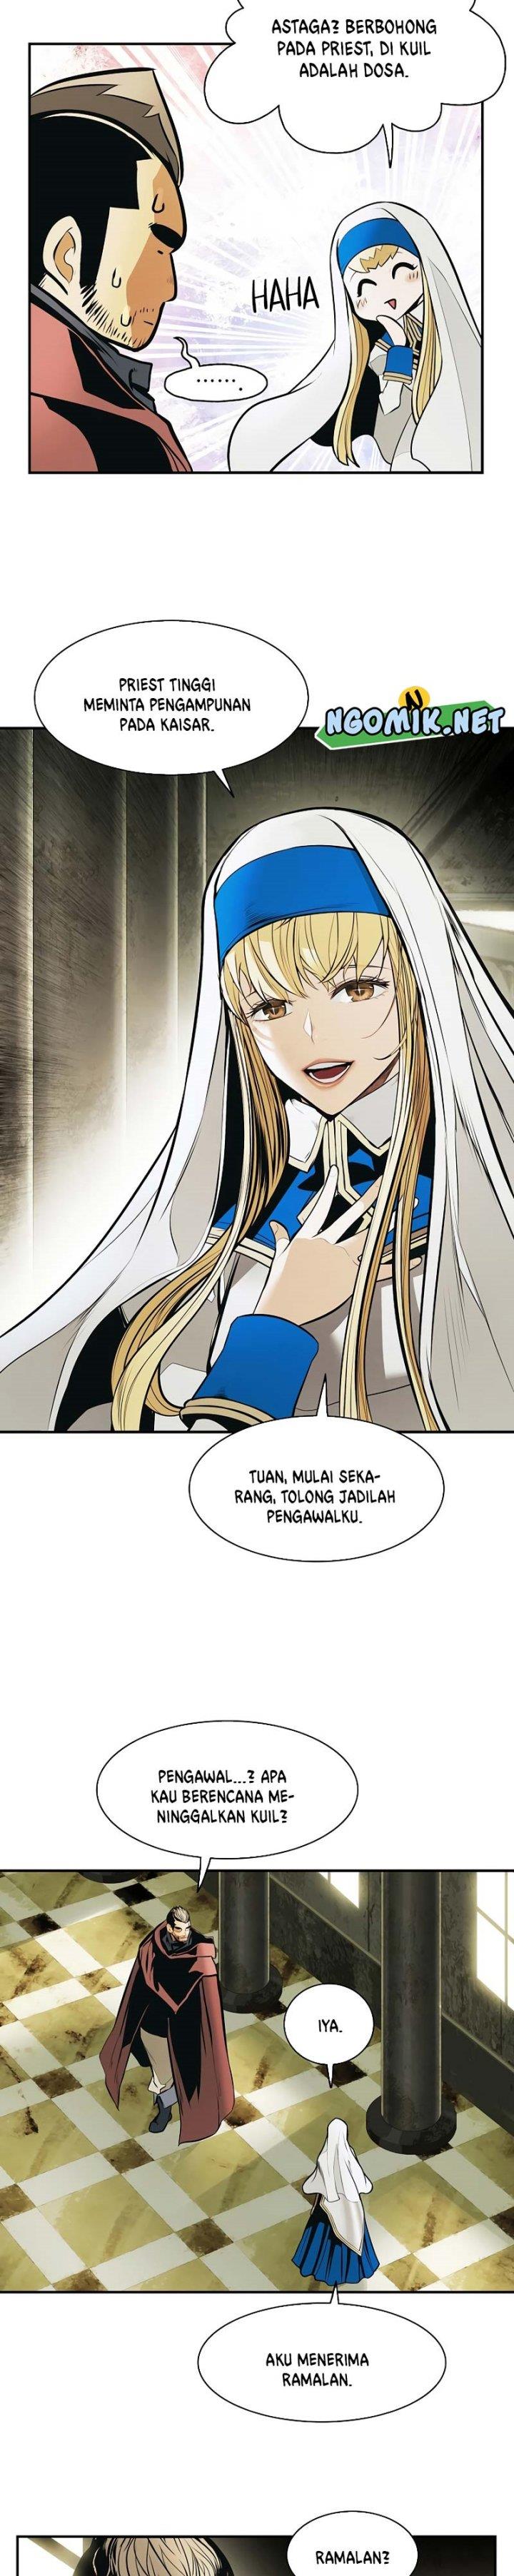 MookHyang – Dark Lady Chapter 175